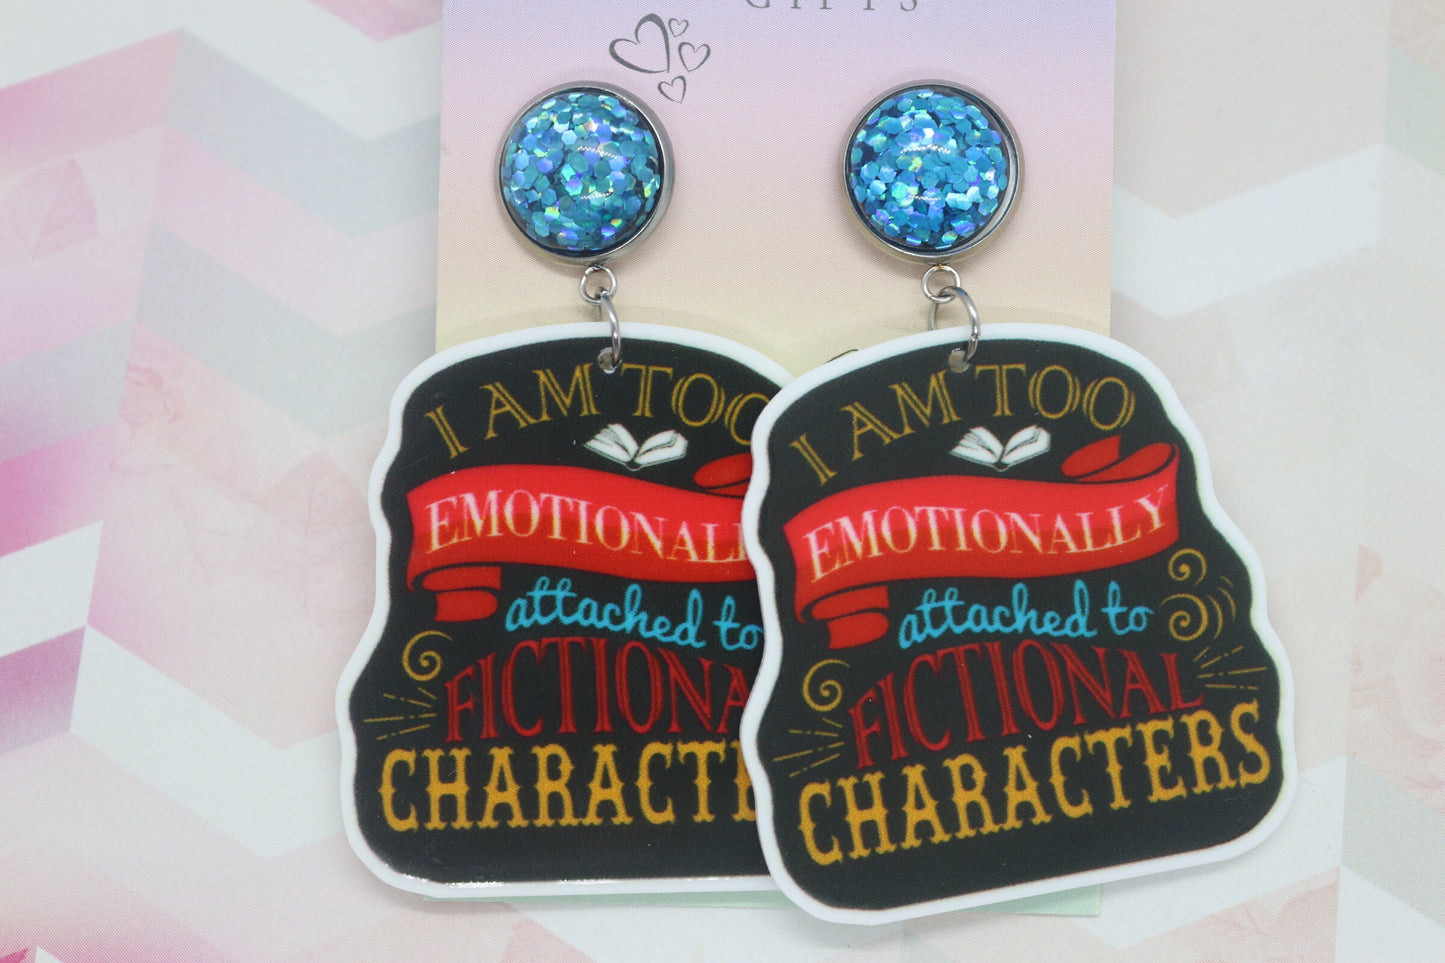 Standard Too Emotionally Attached To Fictional Characters Statement Earrings